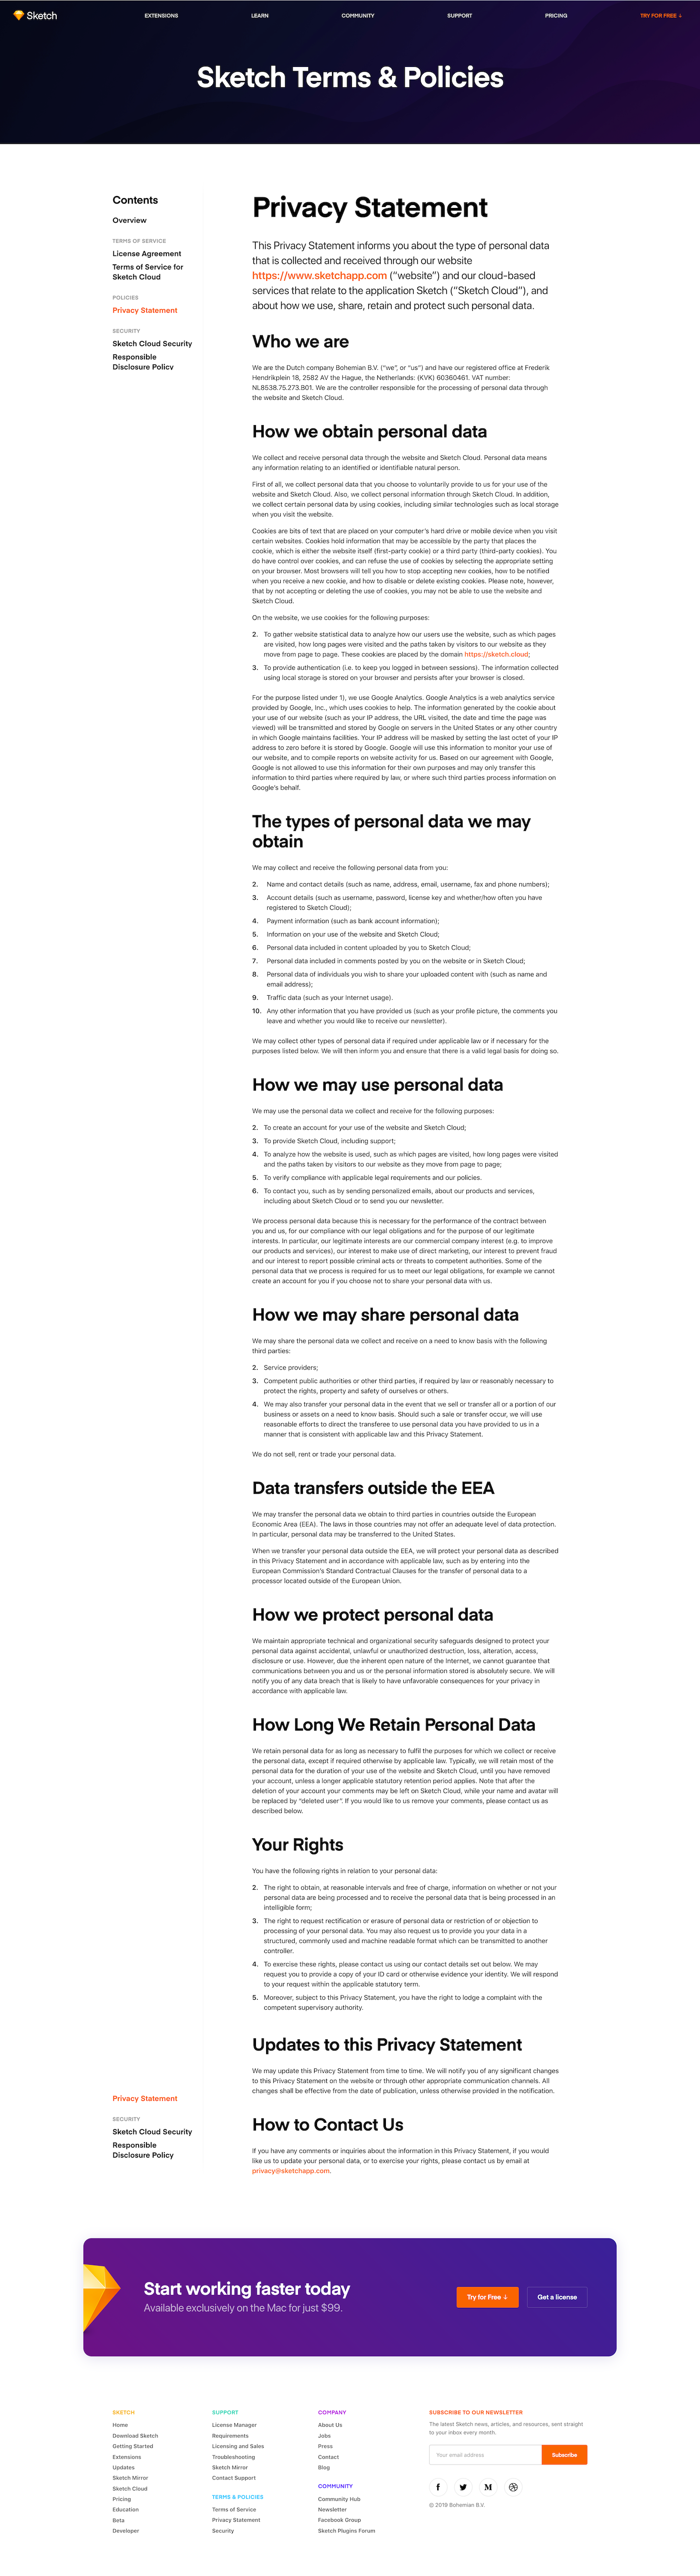 Screenshot of the Privacy Policy page from the Sketch website.